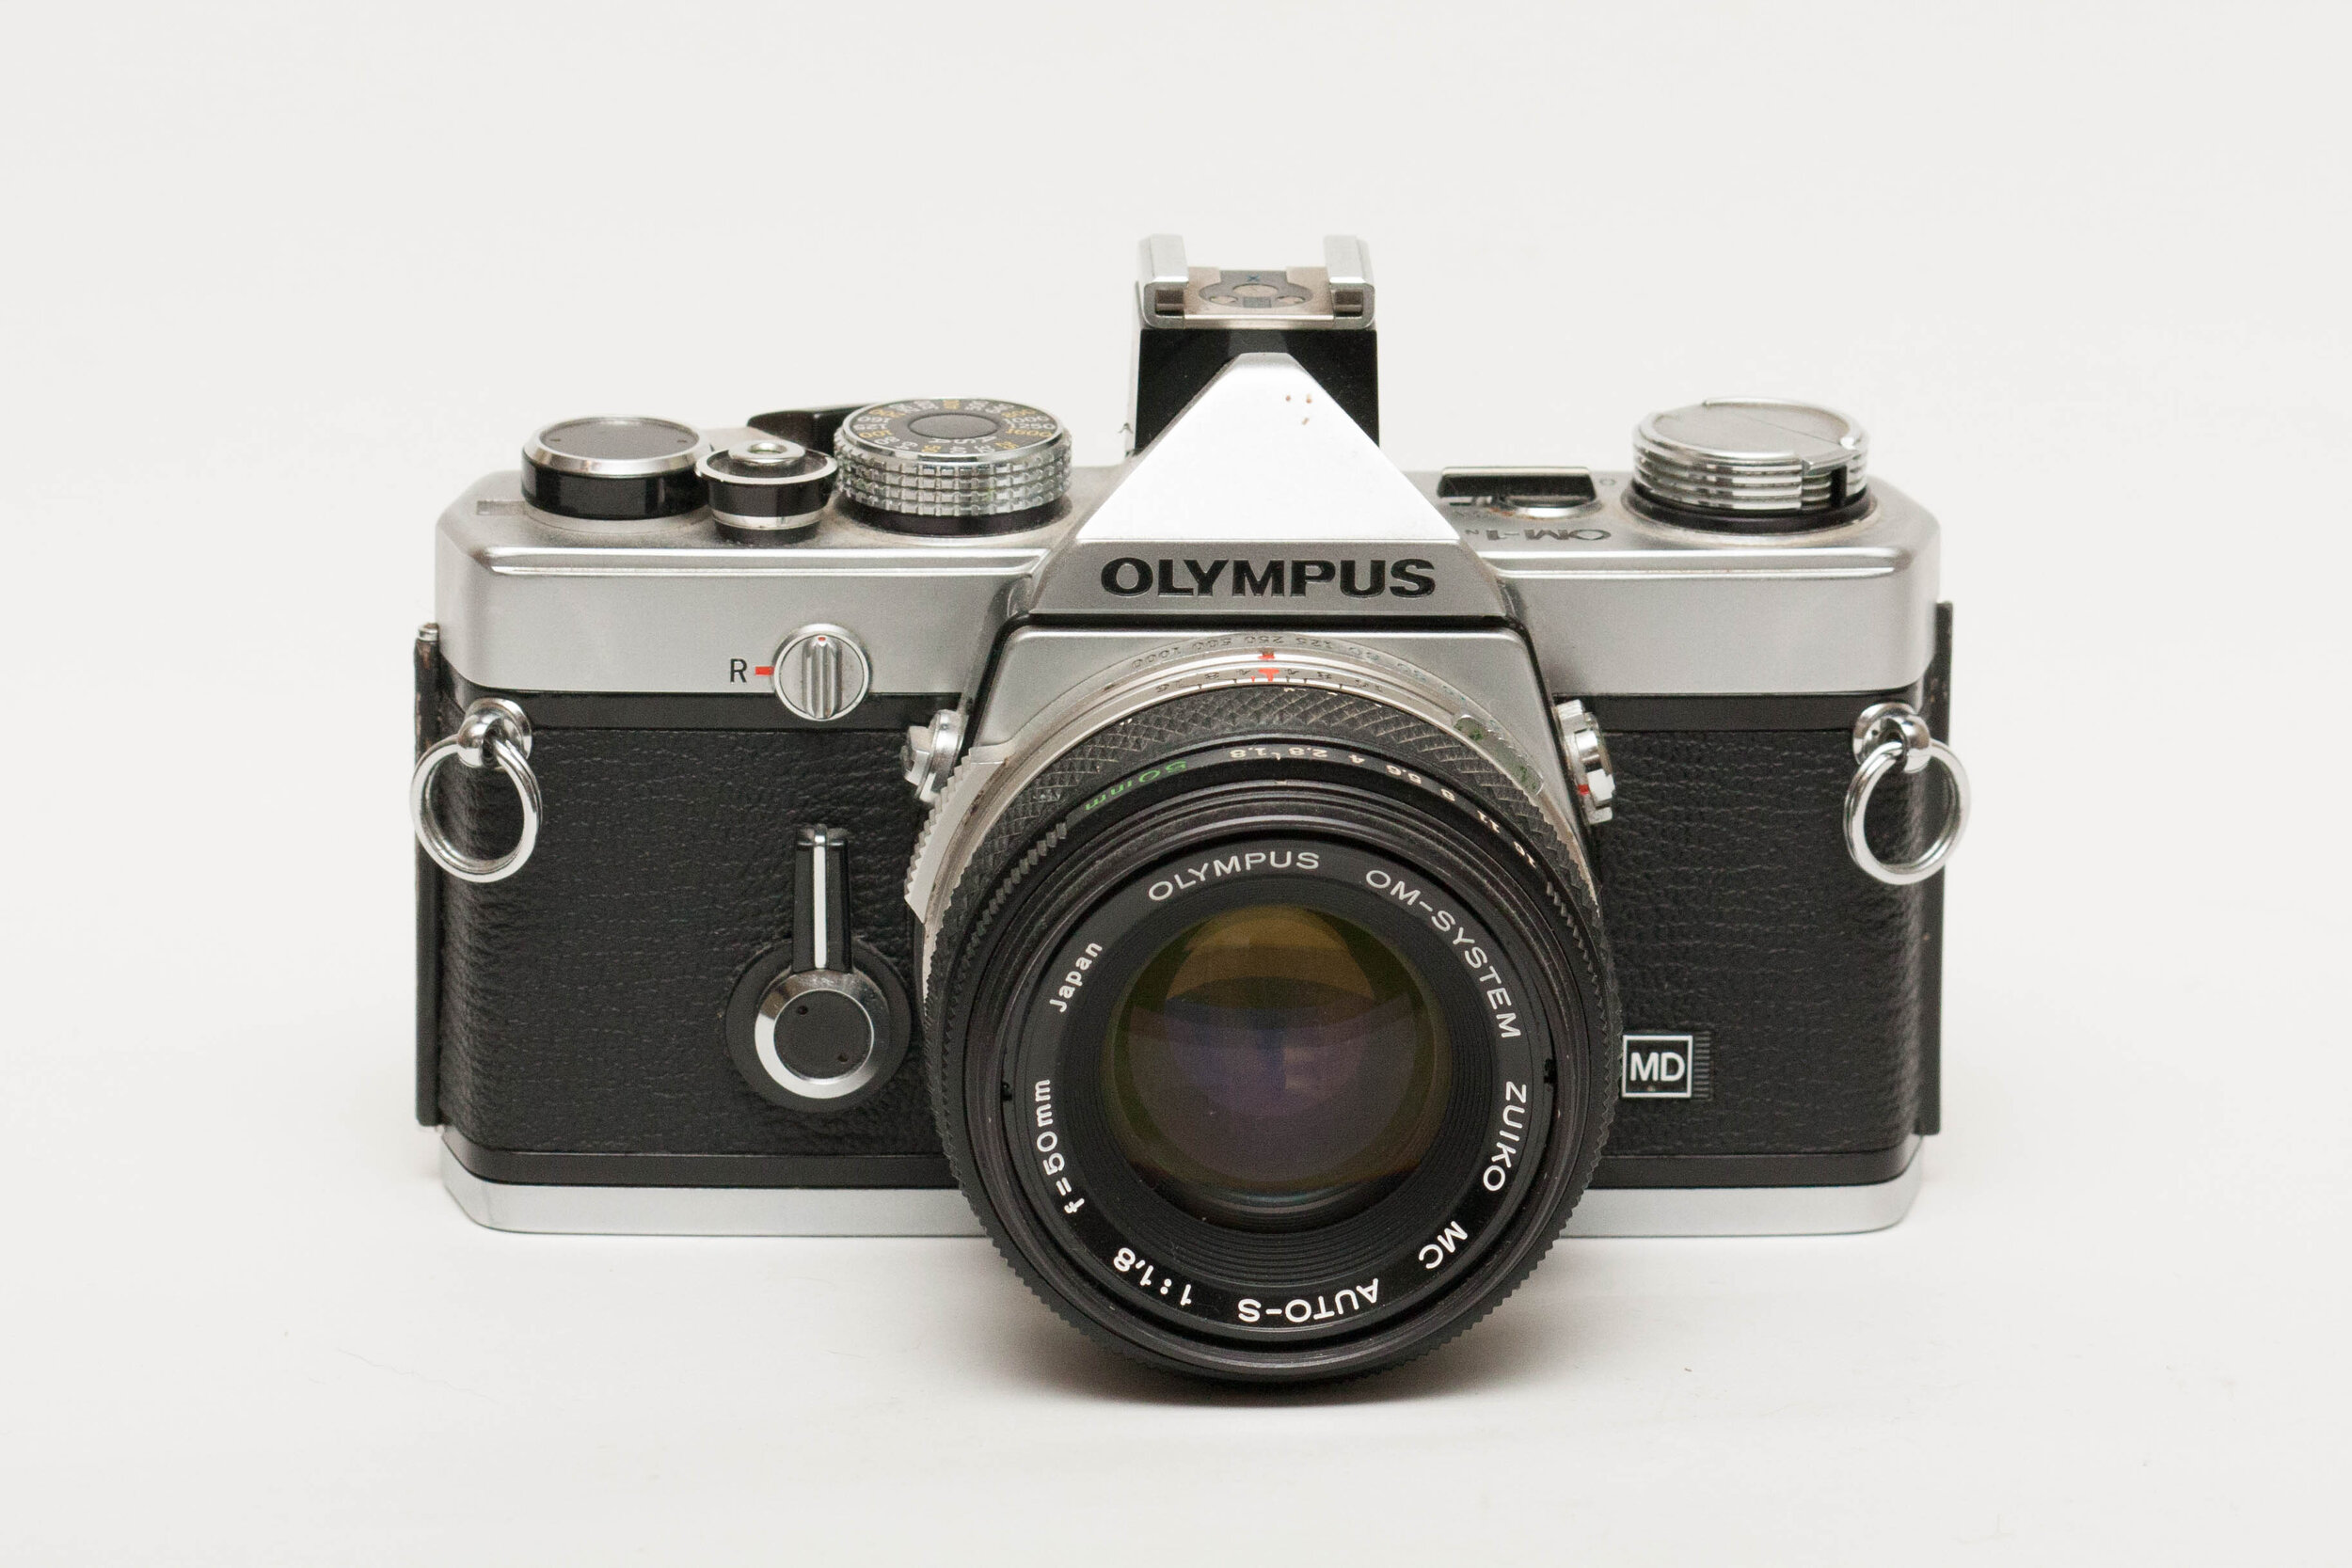 Cheap Cameras for Beginners - Olympus OM-1